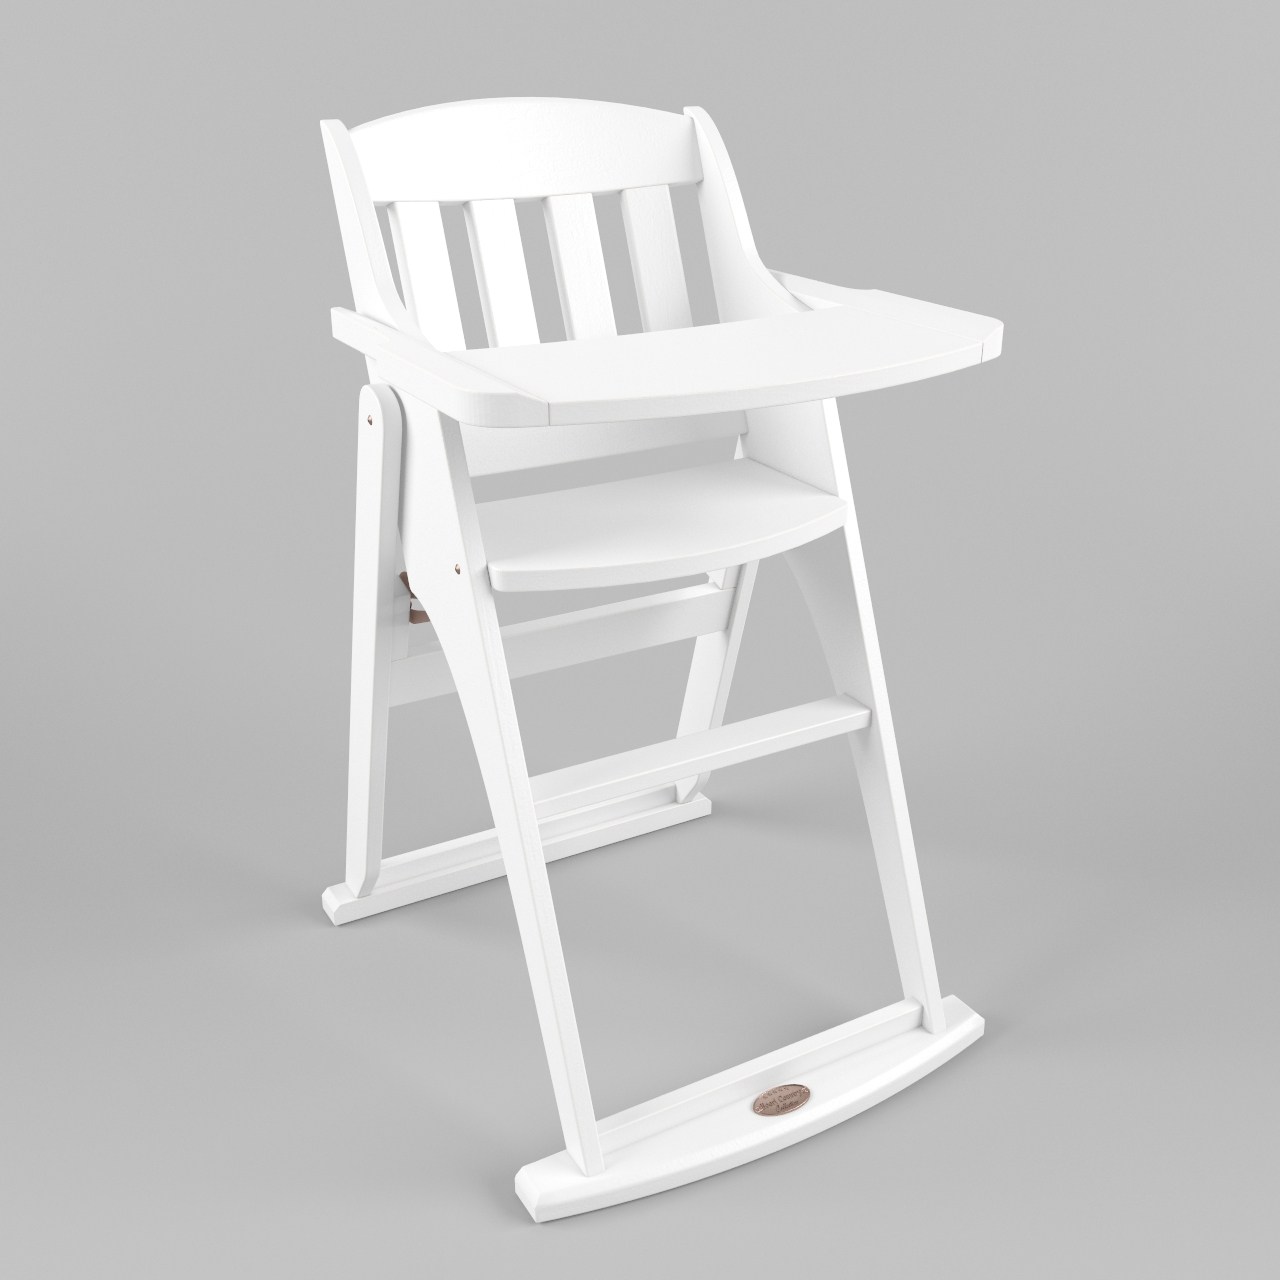 Chair for child 01 5